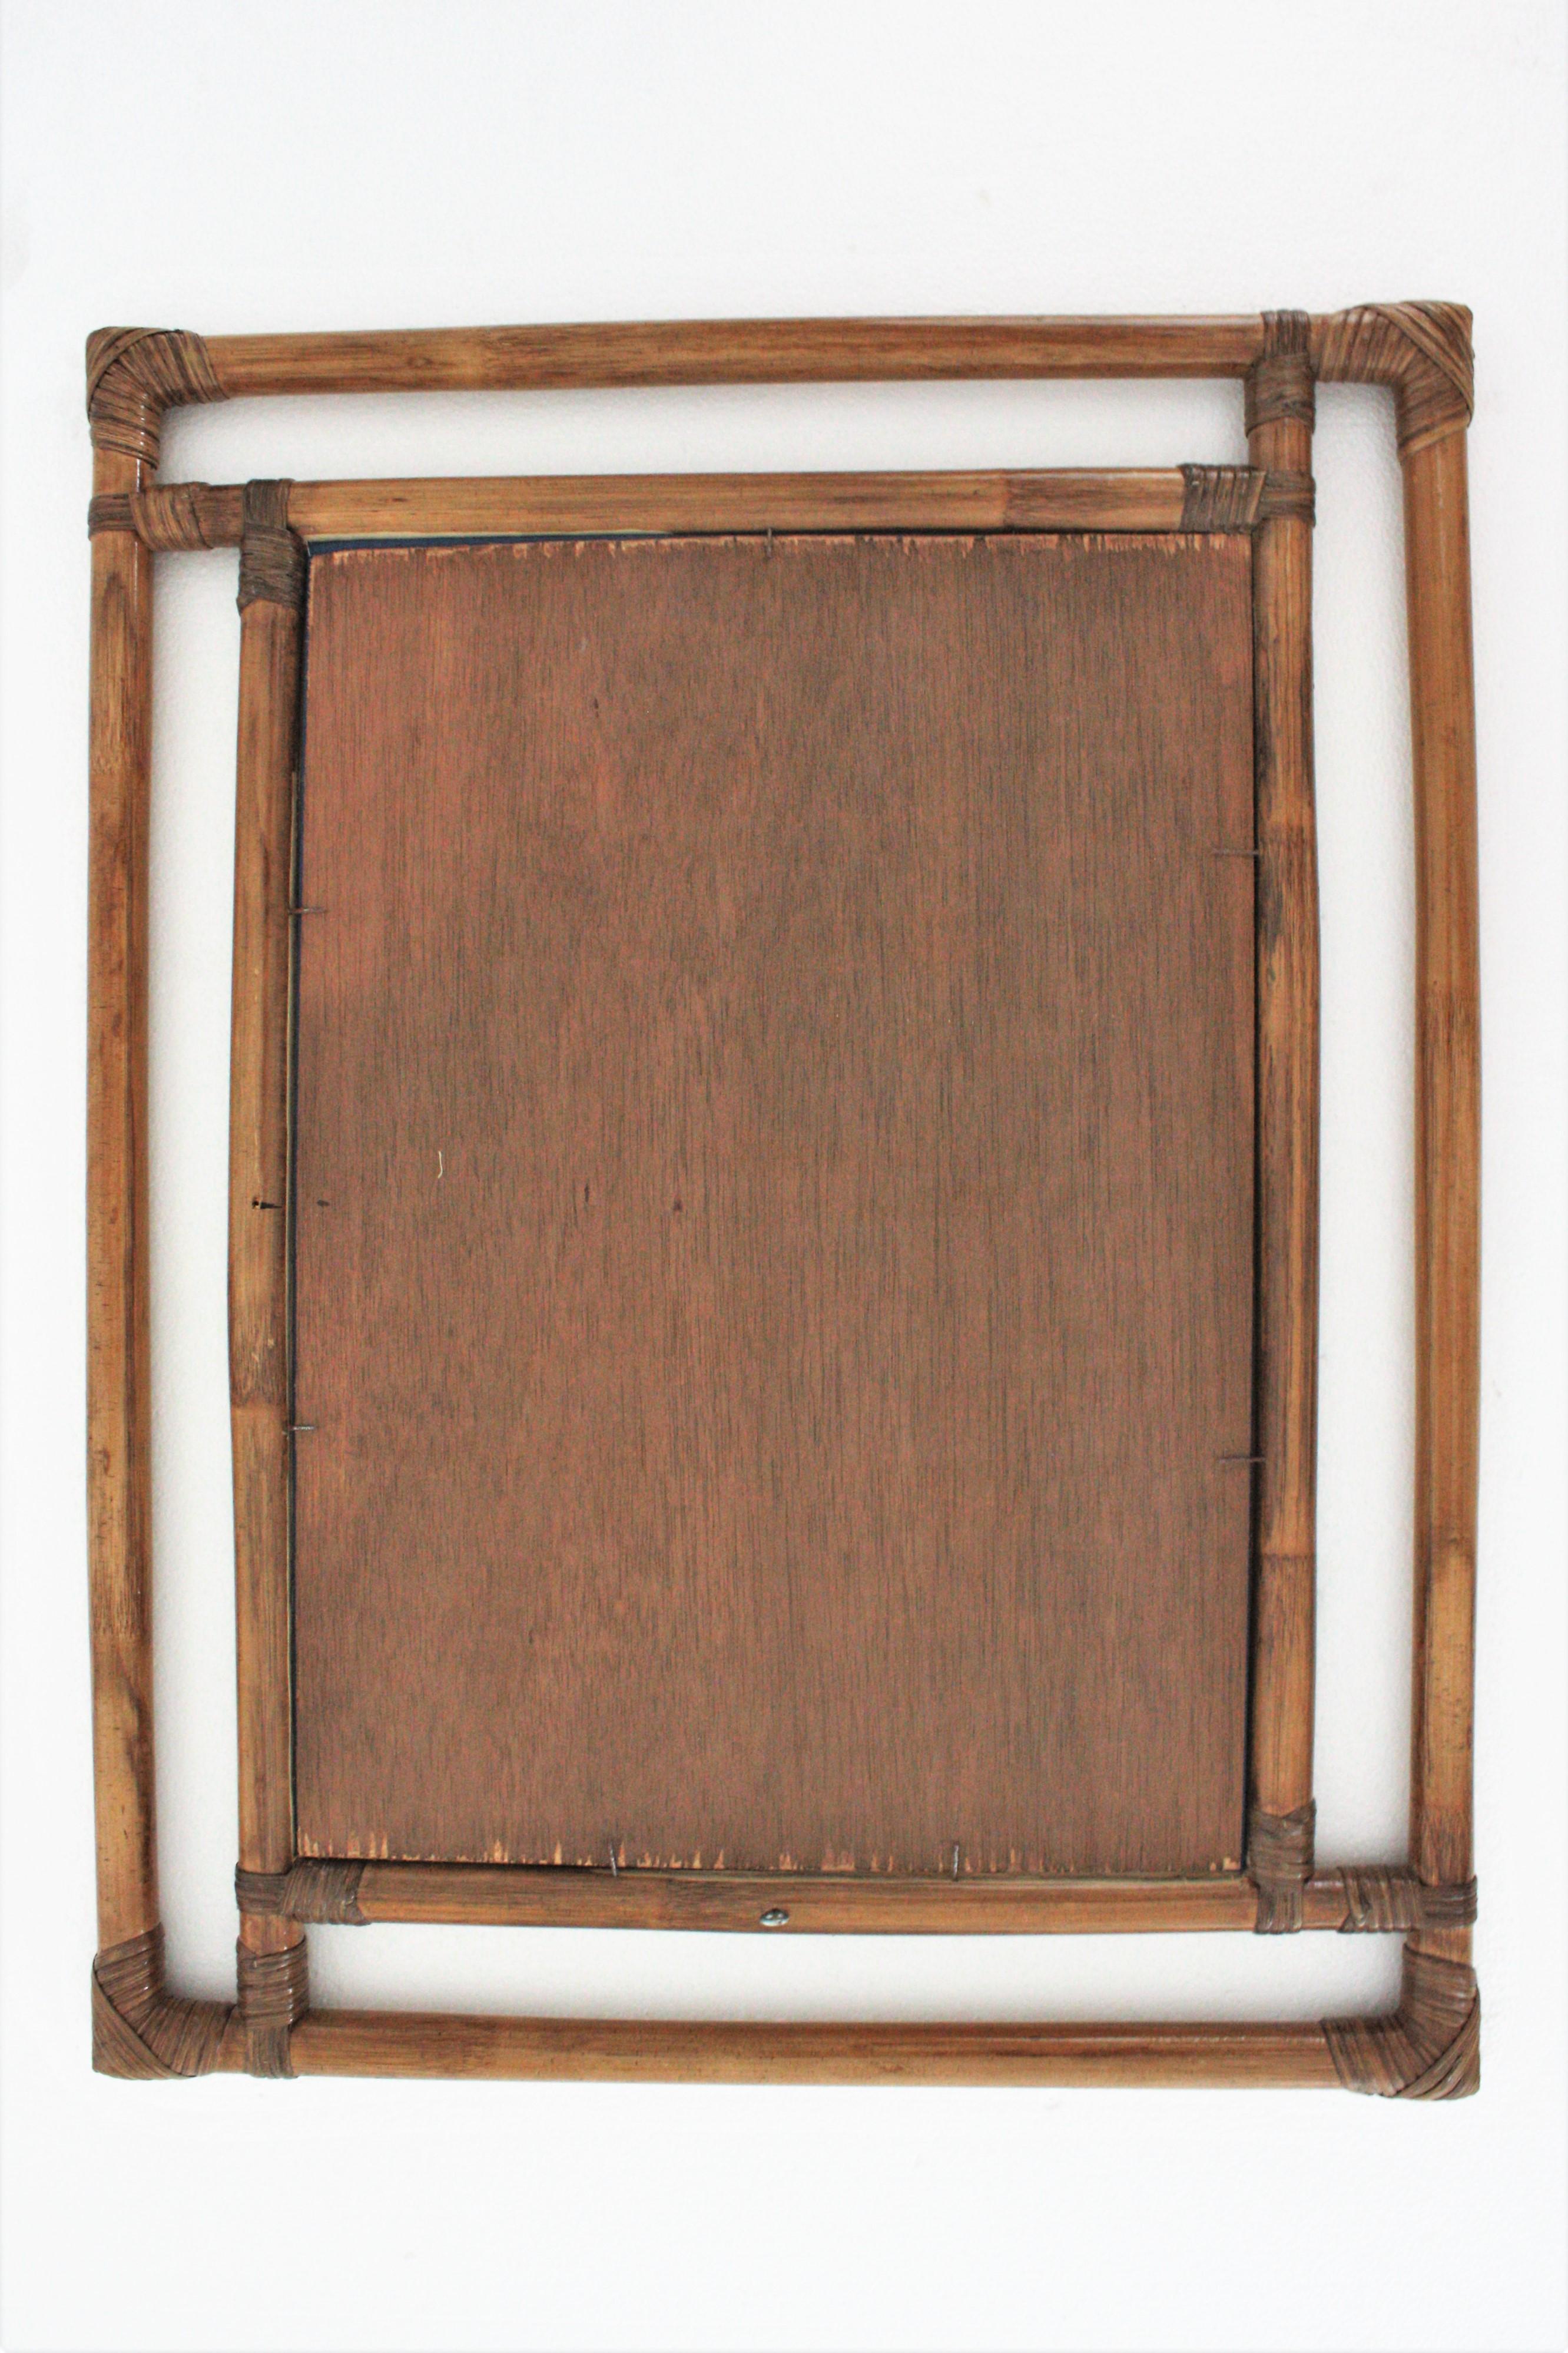 Bamboo Rattan Large Rectangular Mirror with Geometric Frame, 1960s  For Sale 4